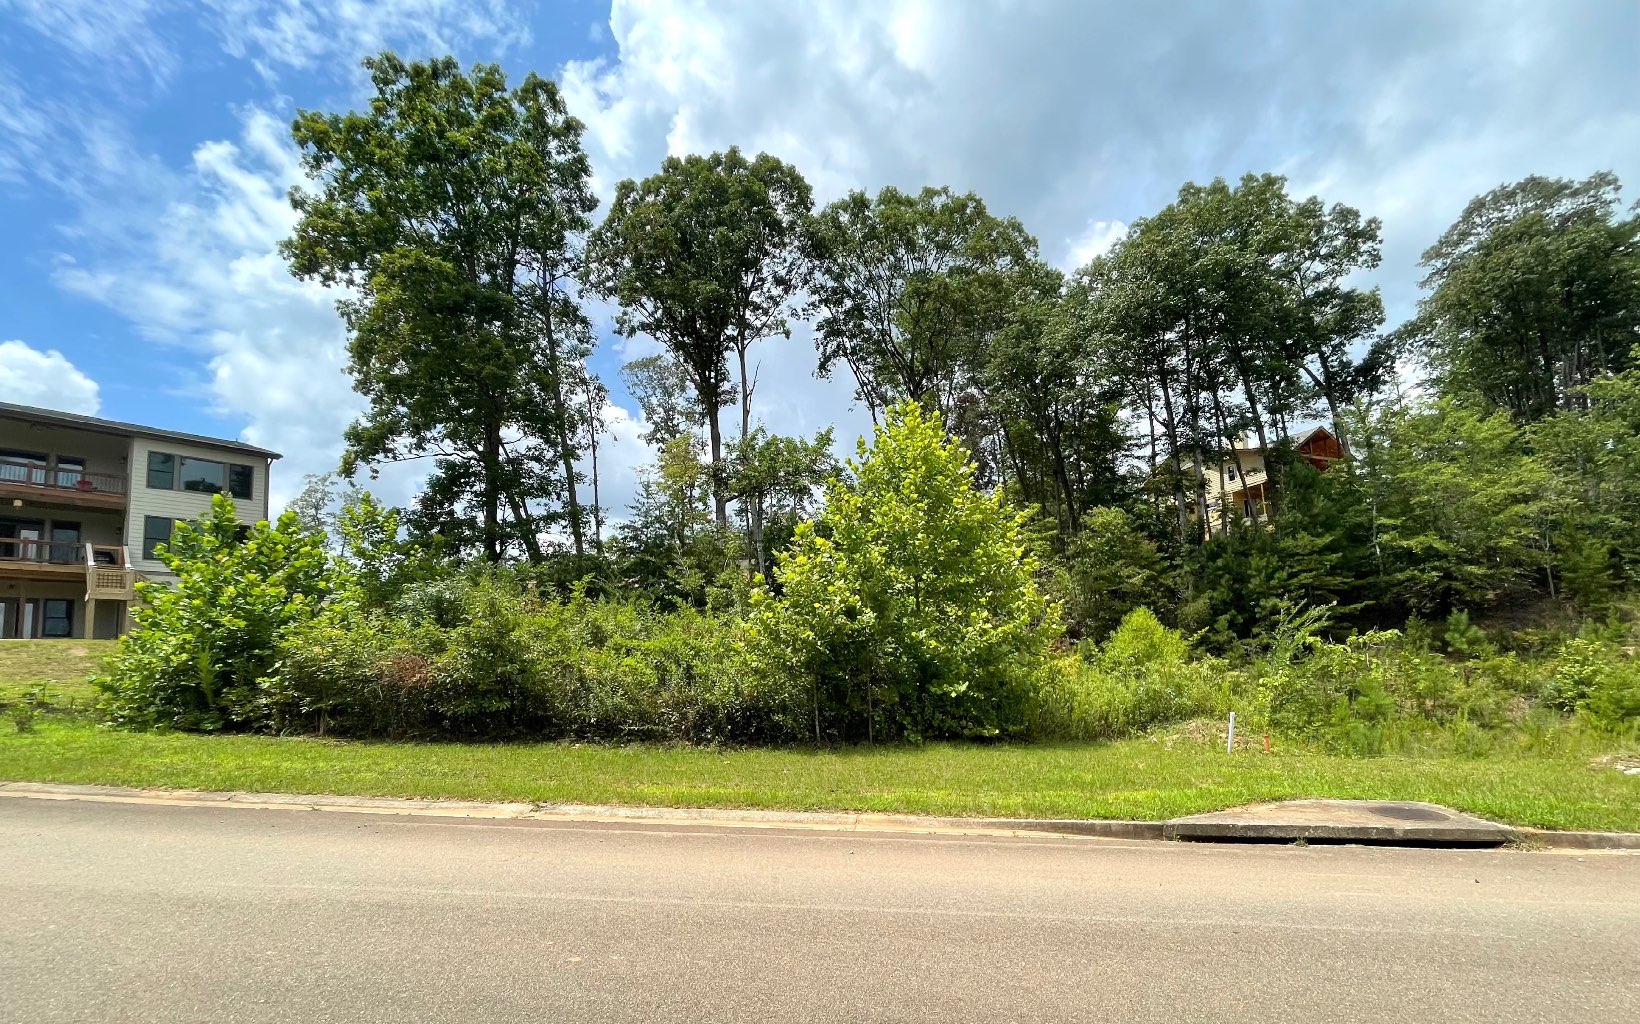 Looking for a great neighborhood to build your next home? Welcome to The Summit at Ellijay! Located within city limits just 1.5 miles from the Historic Downtown Ellijay district, this gated community has all paved roads--underground utilities including public sewer, public water, and high speed internet. This lot will have gorgeous year-round views once trees are cleared from the building site. Bring your builder or we can recommend one! Short term rentals are allowed in this community. You will be hard pressed to find a more convenient location to build your dream home! Additional lots available if you are looking for more acreage. 17 lots may be purchased together as a package (see MLS# 319811).